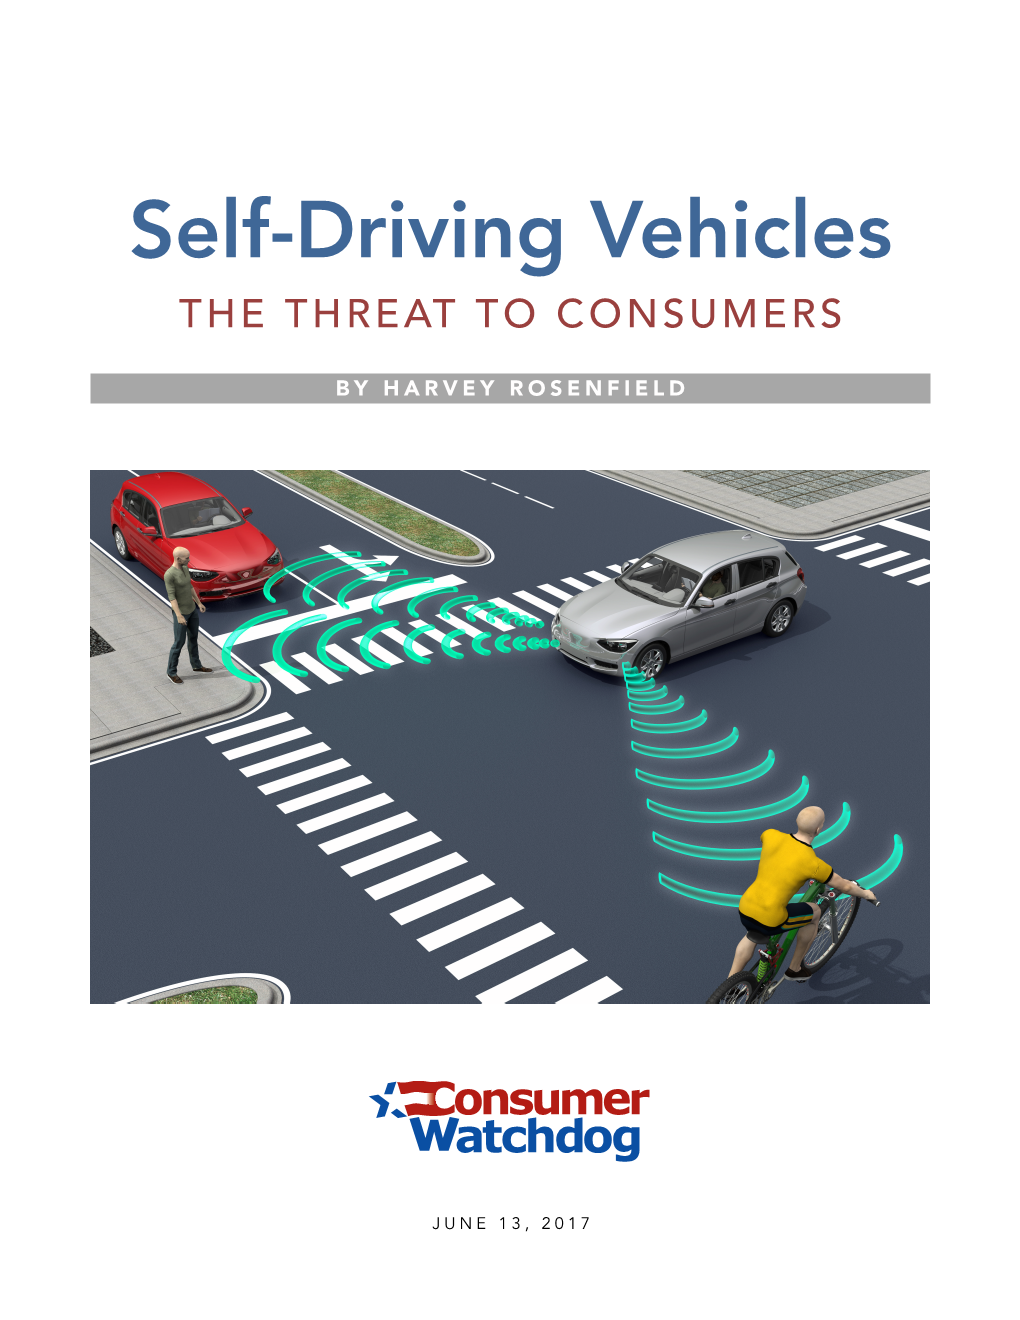 Self-Driving Vehicles the THREAT to CONSUMERS